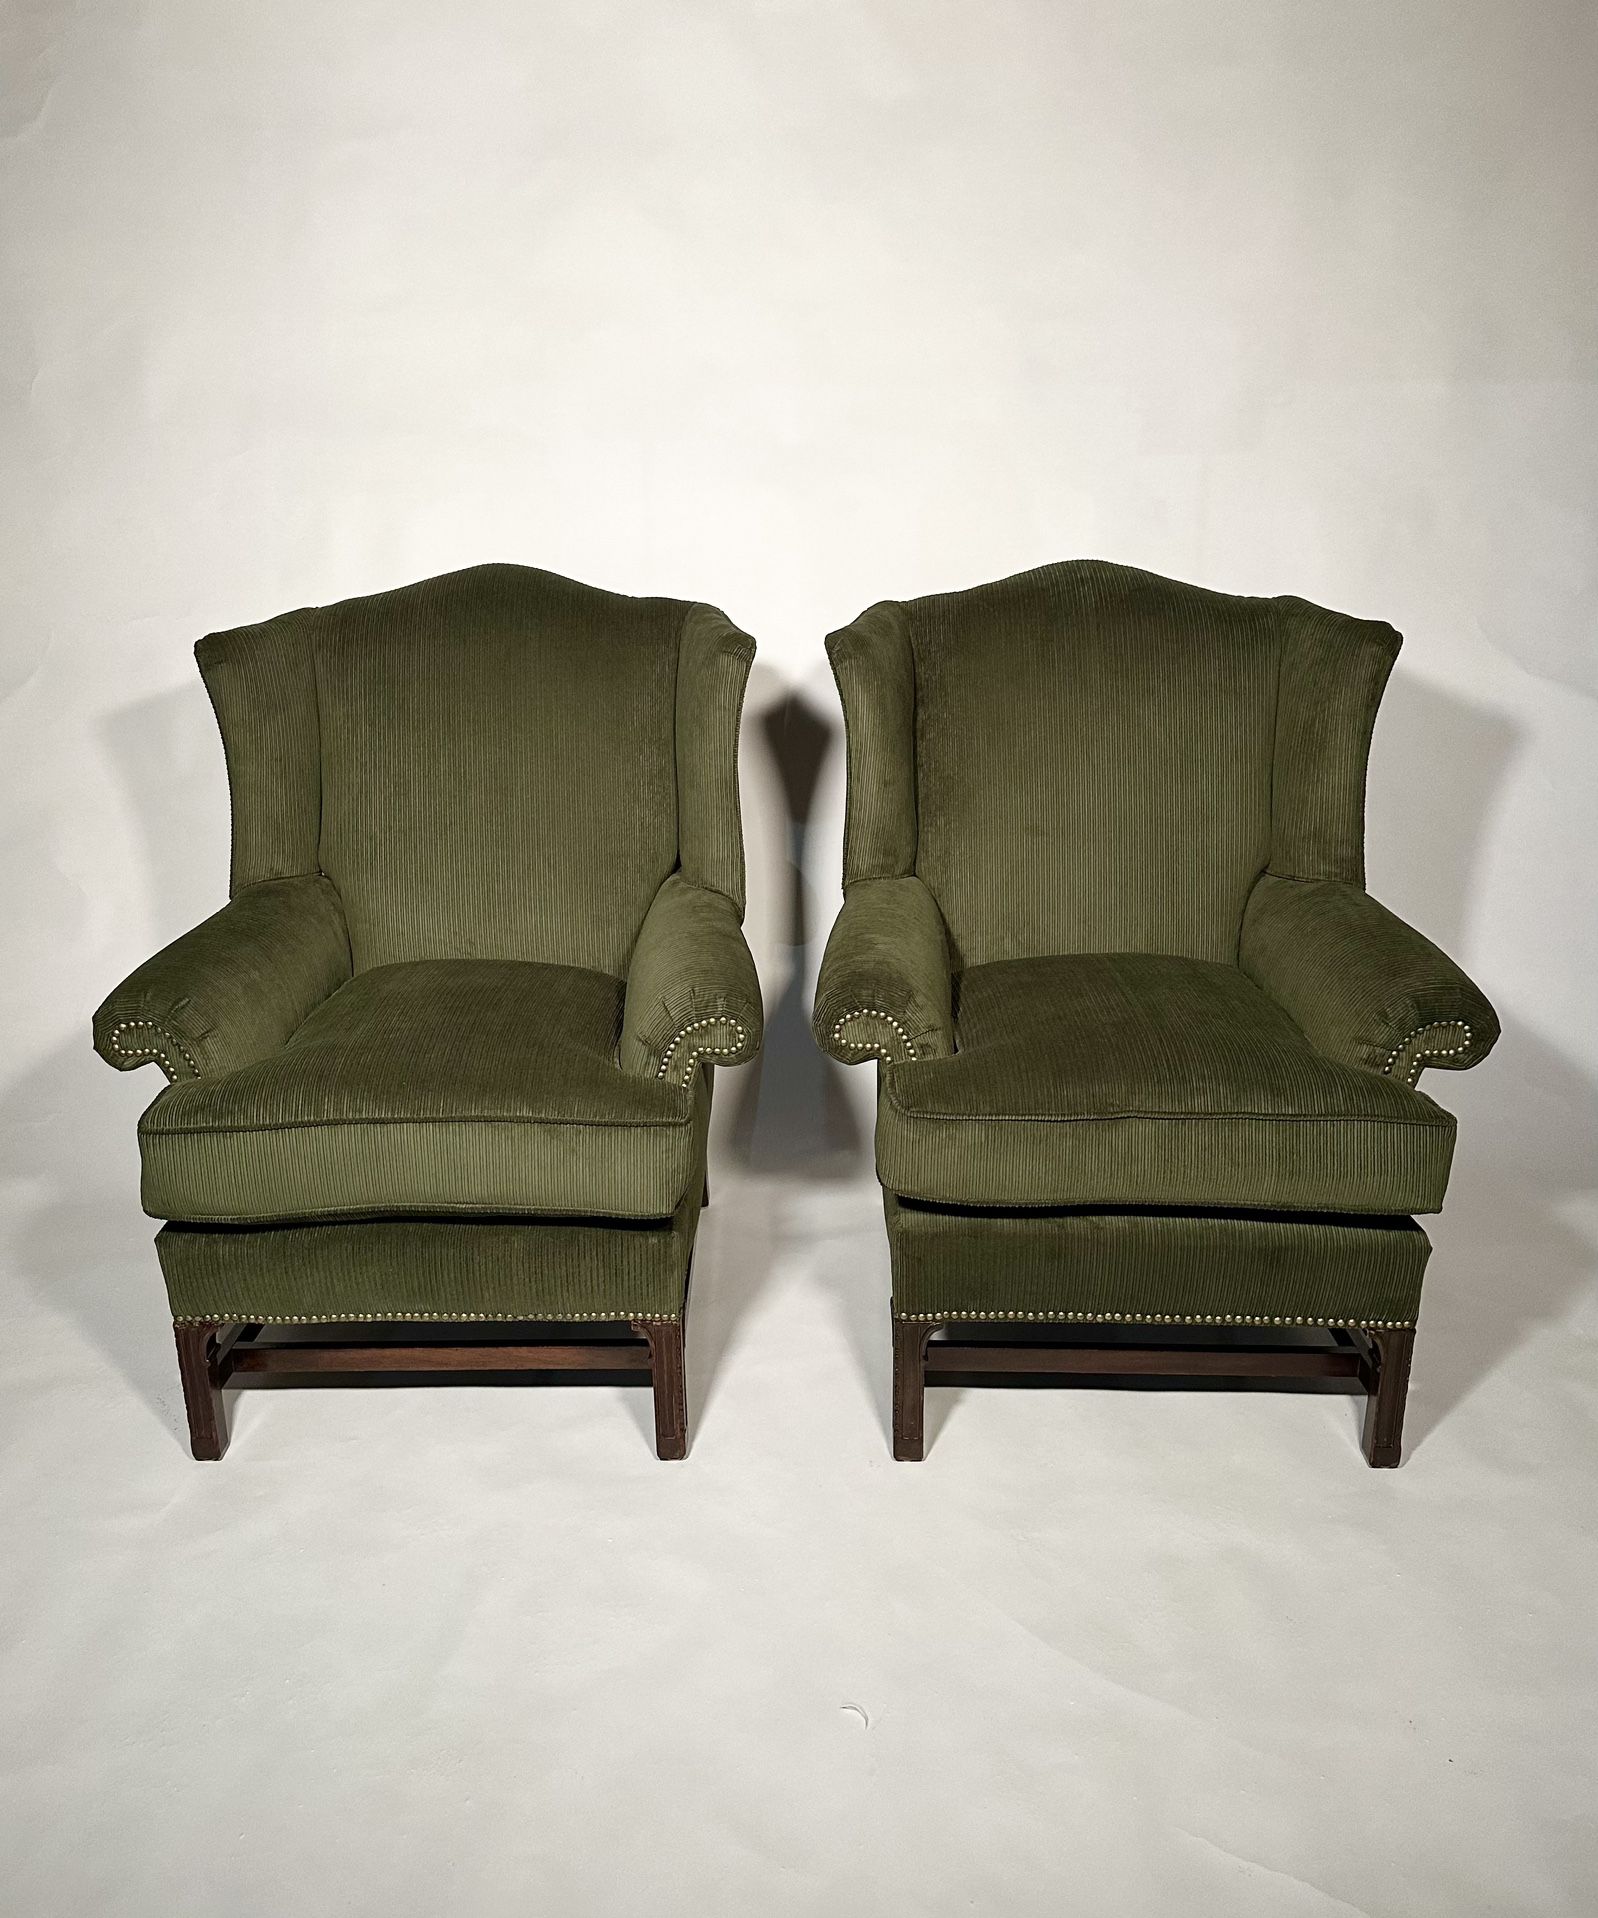 Pair of Vintage Gregorian style Wingback Chairs OBO